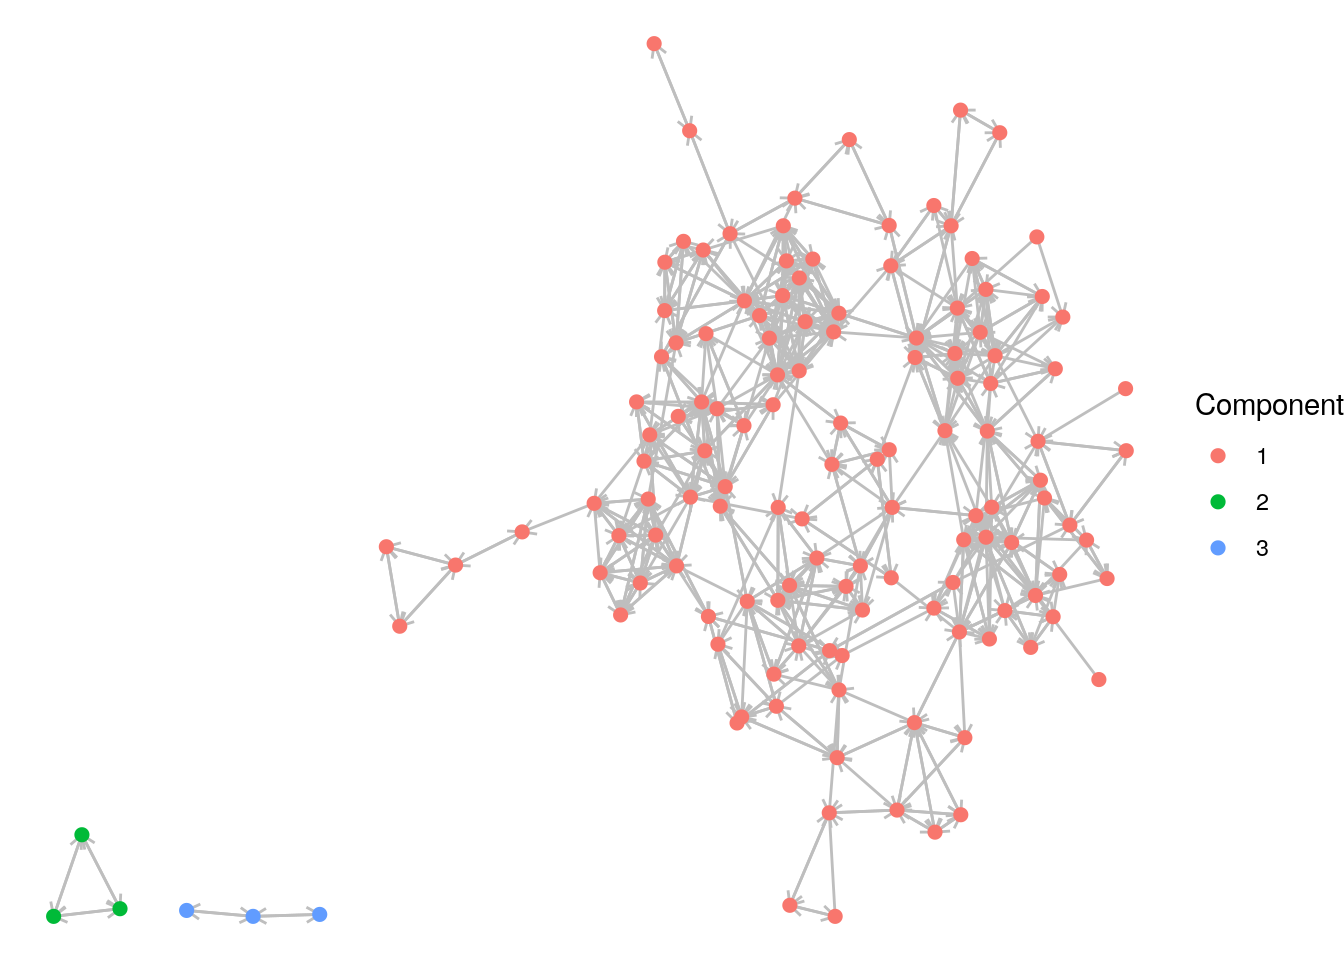 The reported `schoolfriends` graph color coded by its (weakly) connected components